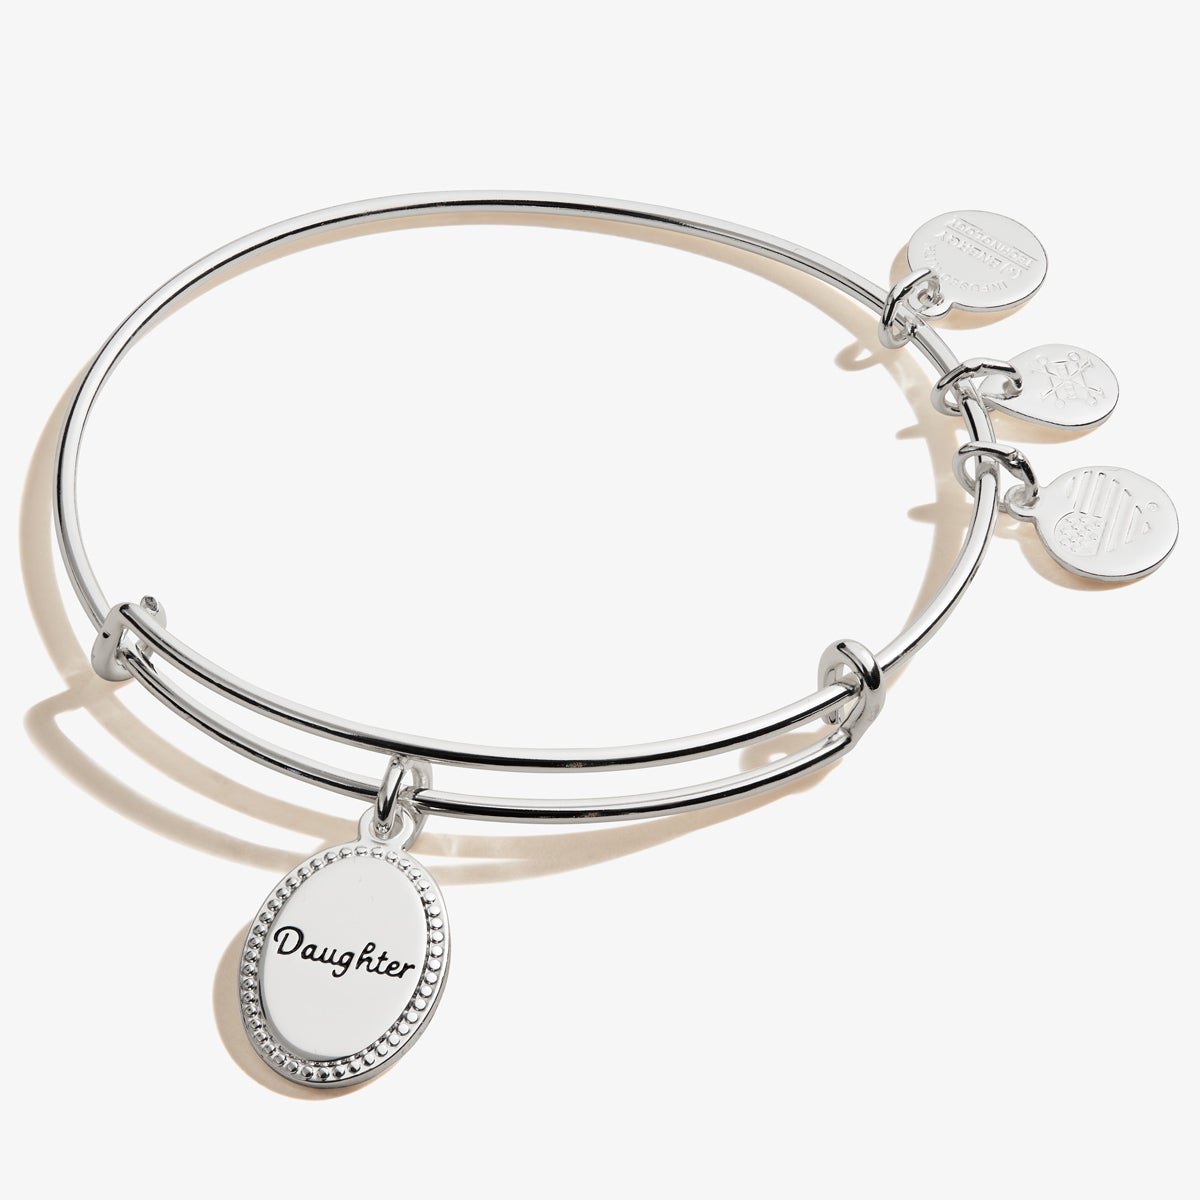 Daughter, 'Most Precious Gift' Charm Bangle Bracelet – ALEX AND ANI